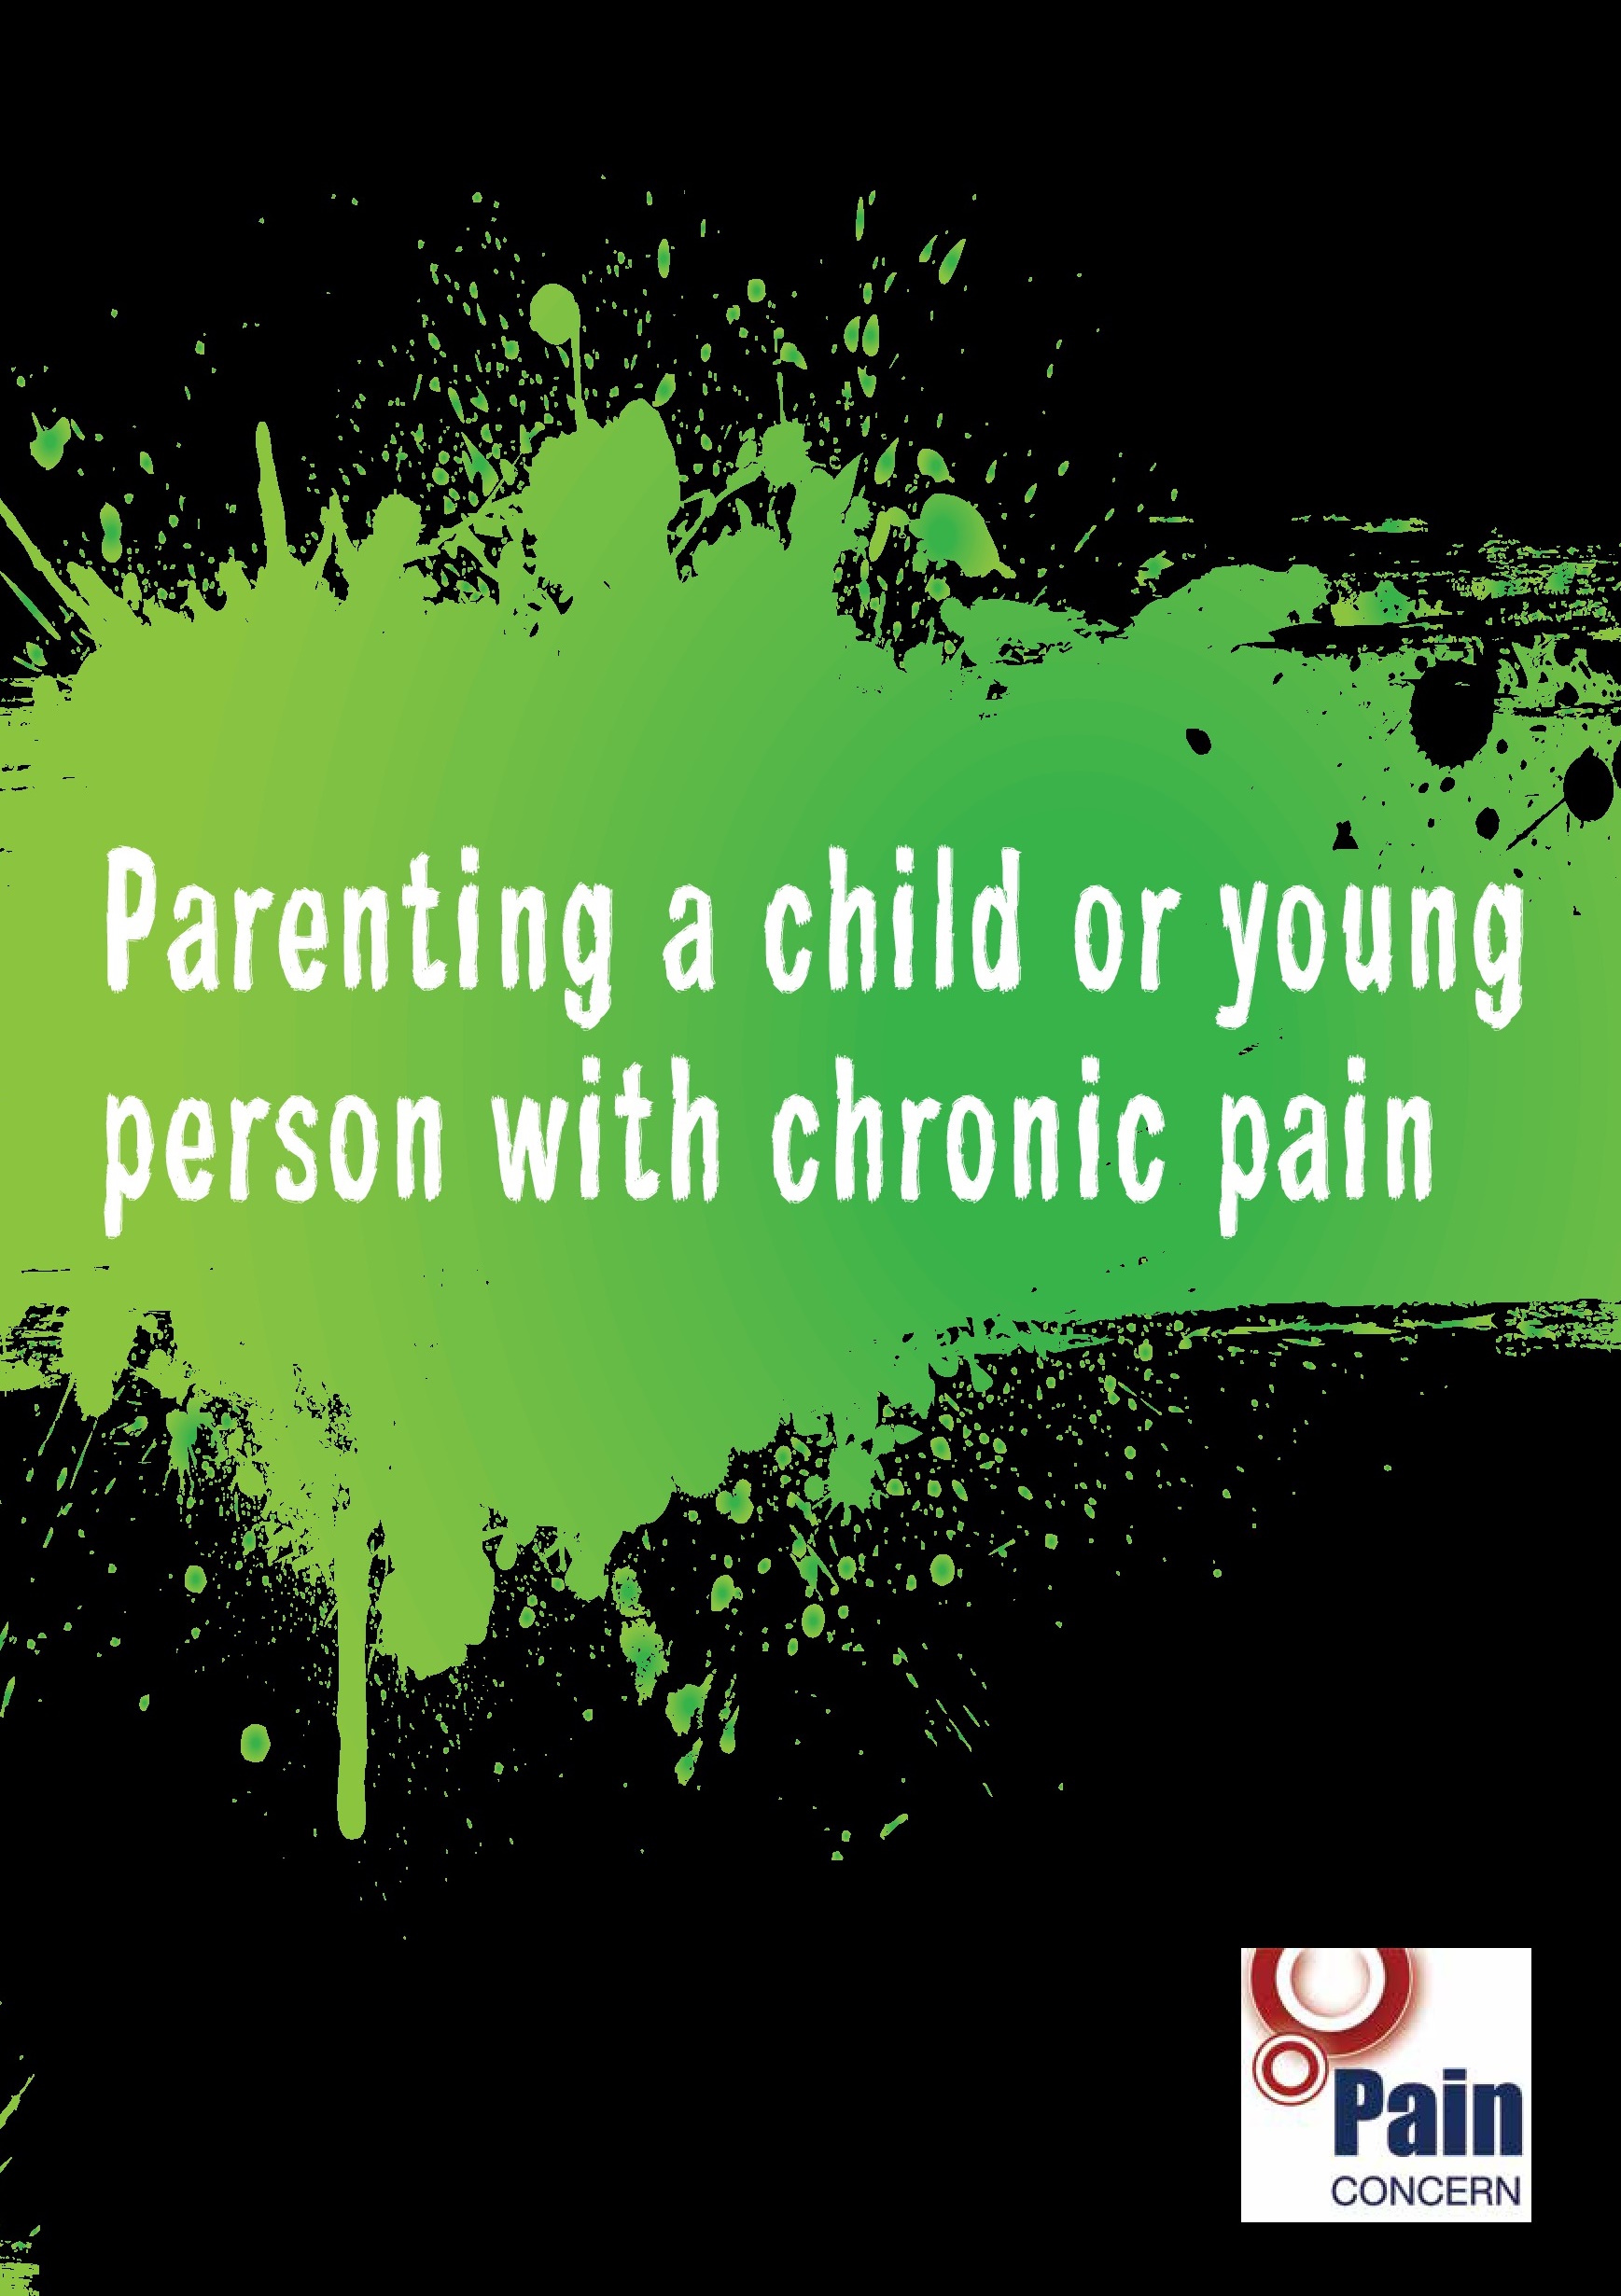 Parenting a child or young person with chronic pain